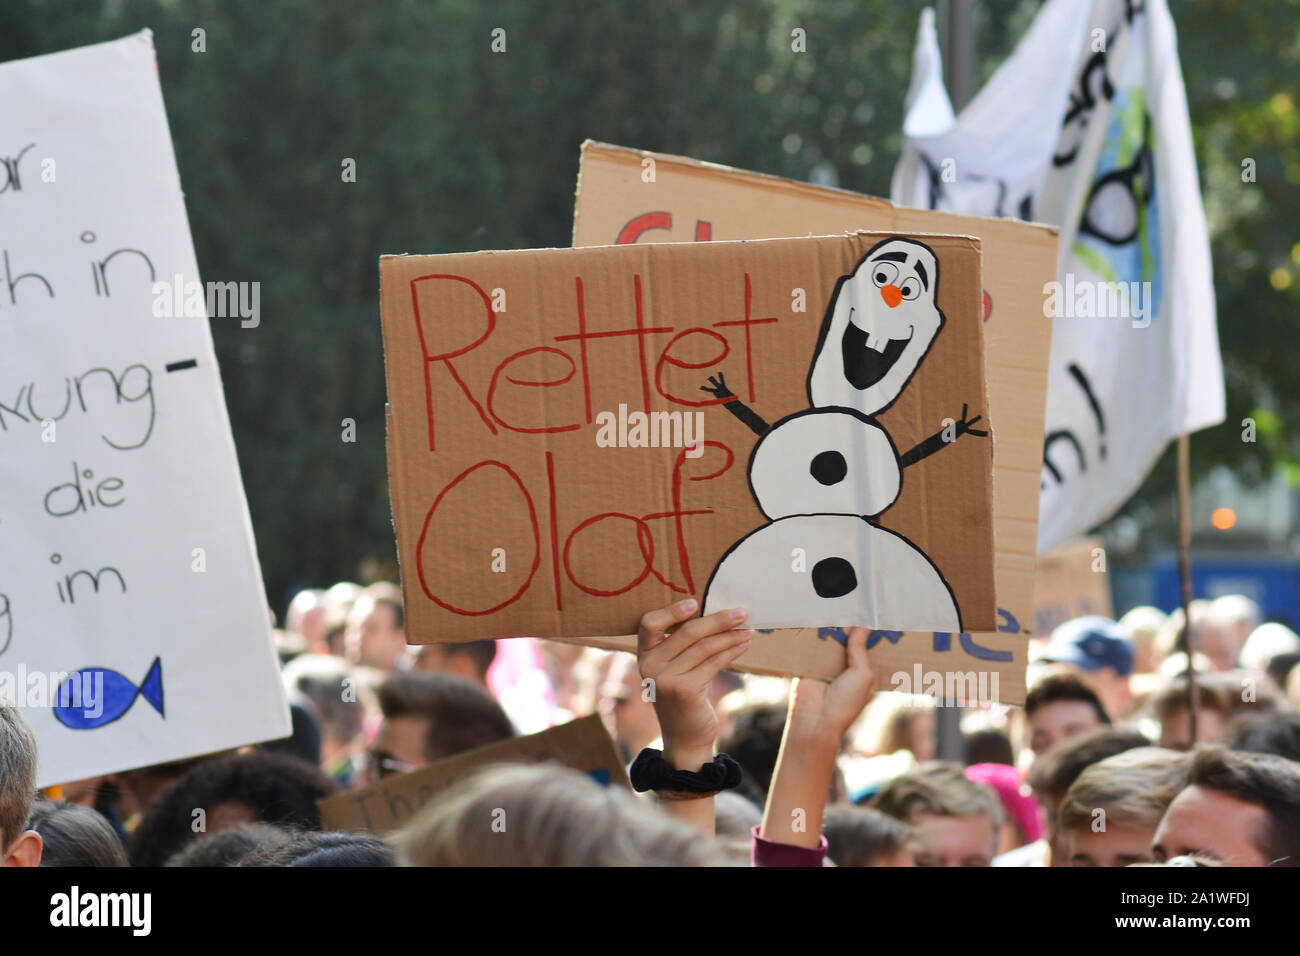 Protest sign with snow saying `Safe Olaf` held up by young people during Global Climate Strike / Fridays for future Stock Photo